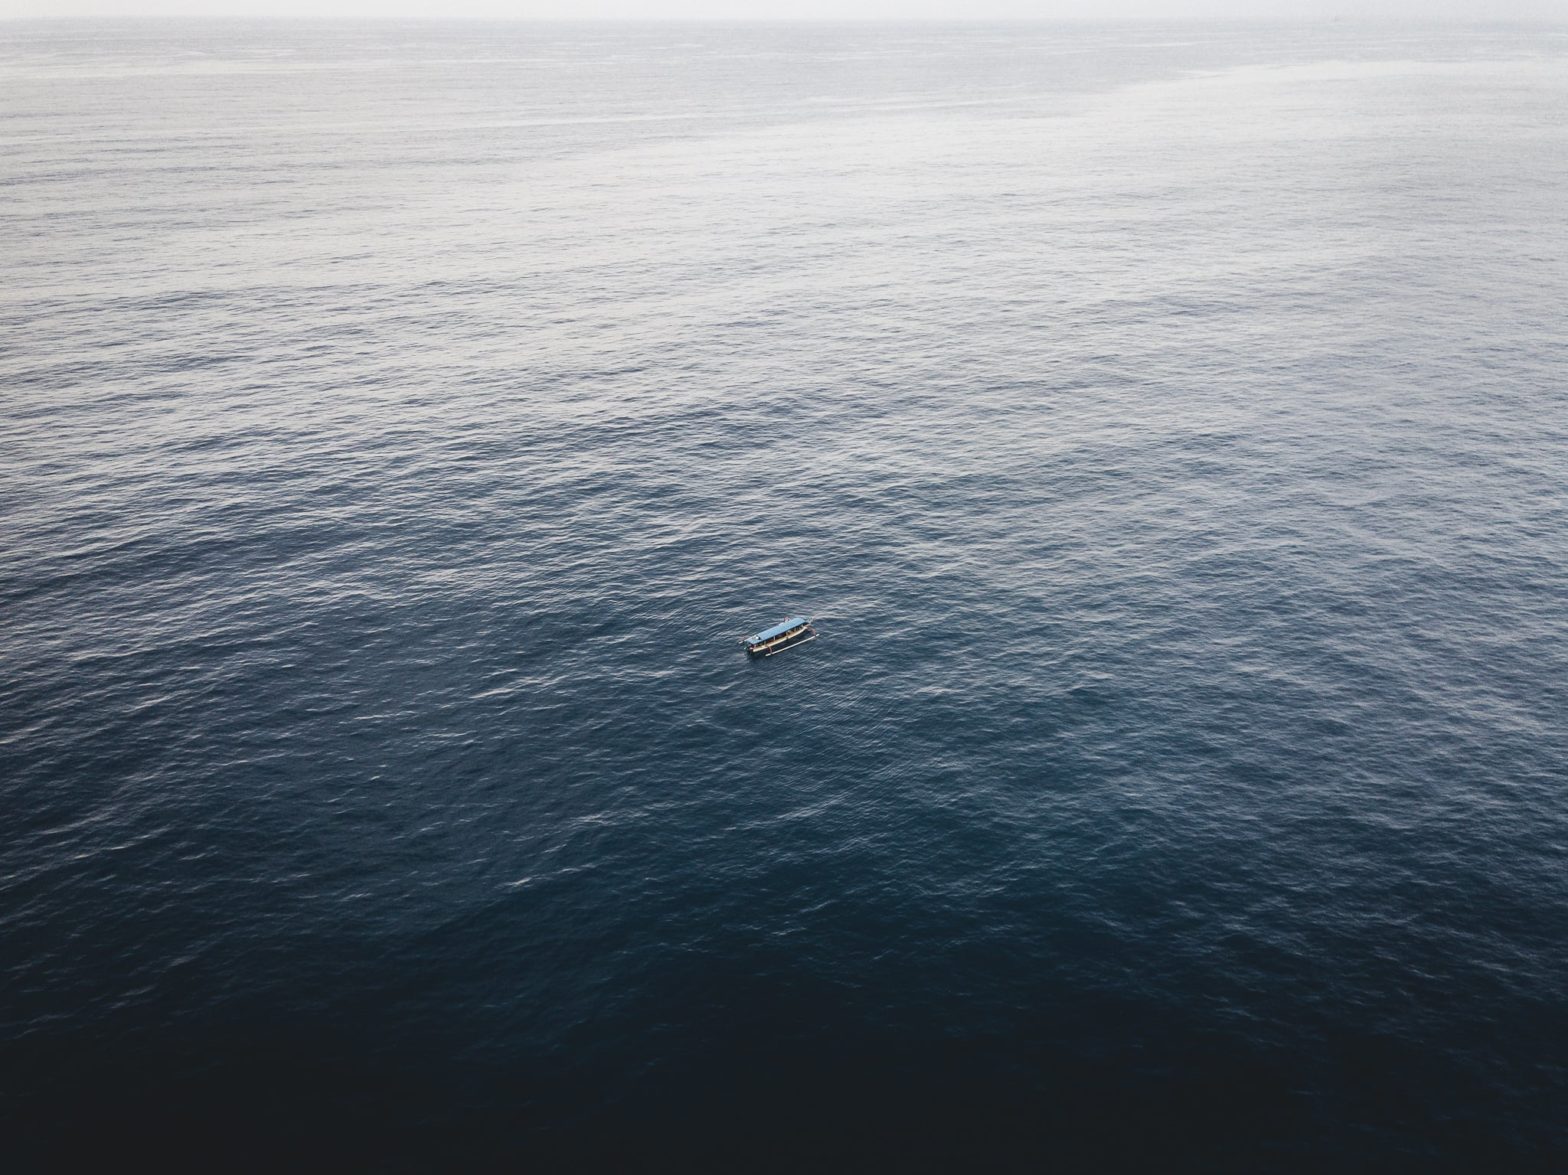 Aerial view of a small boat in the sea